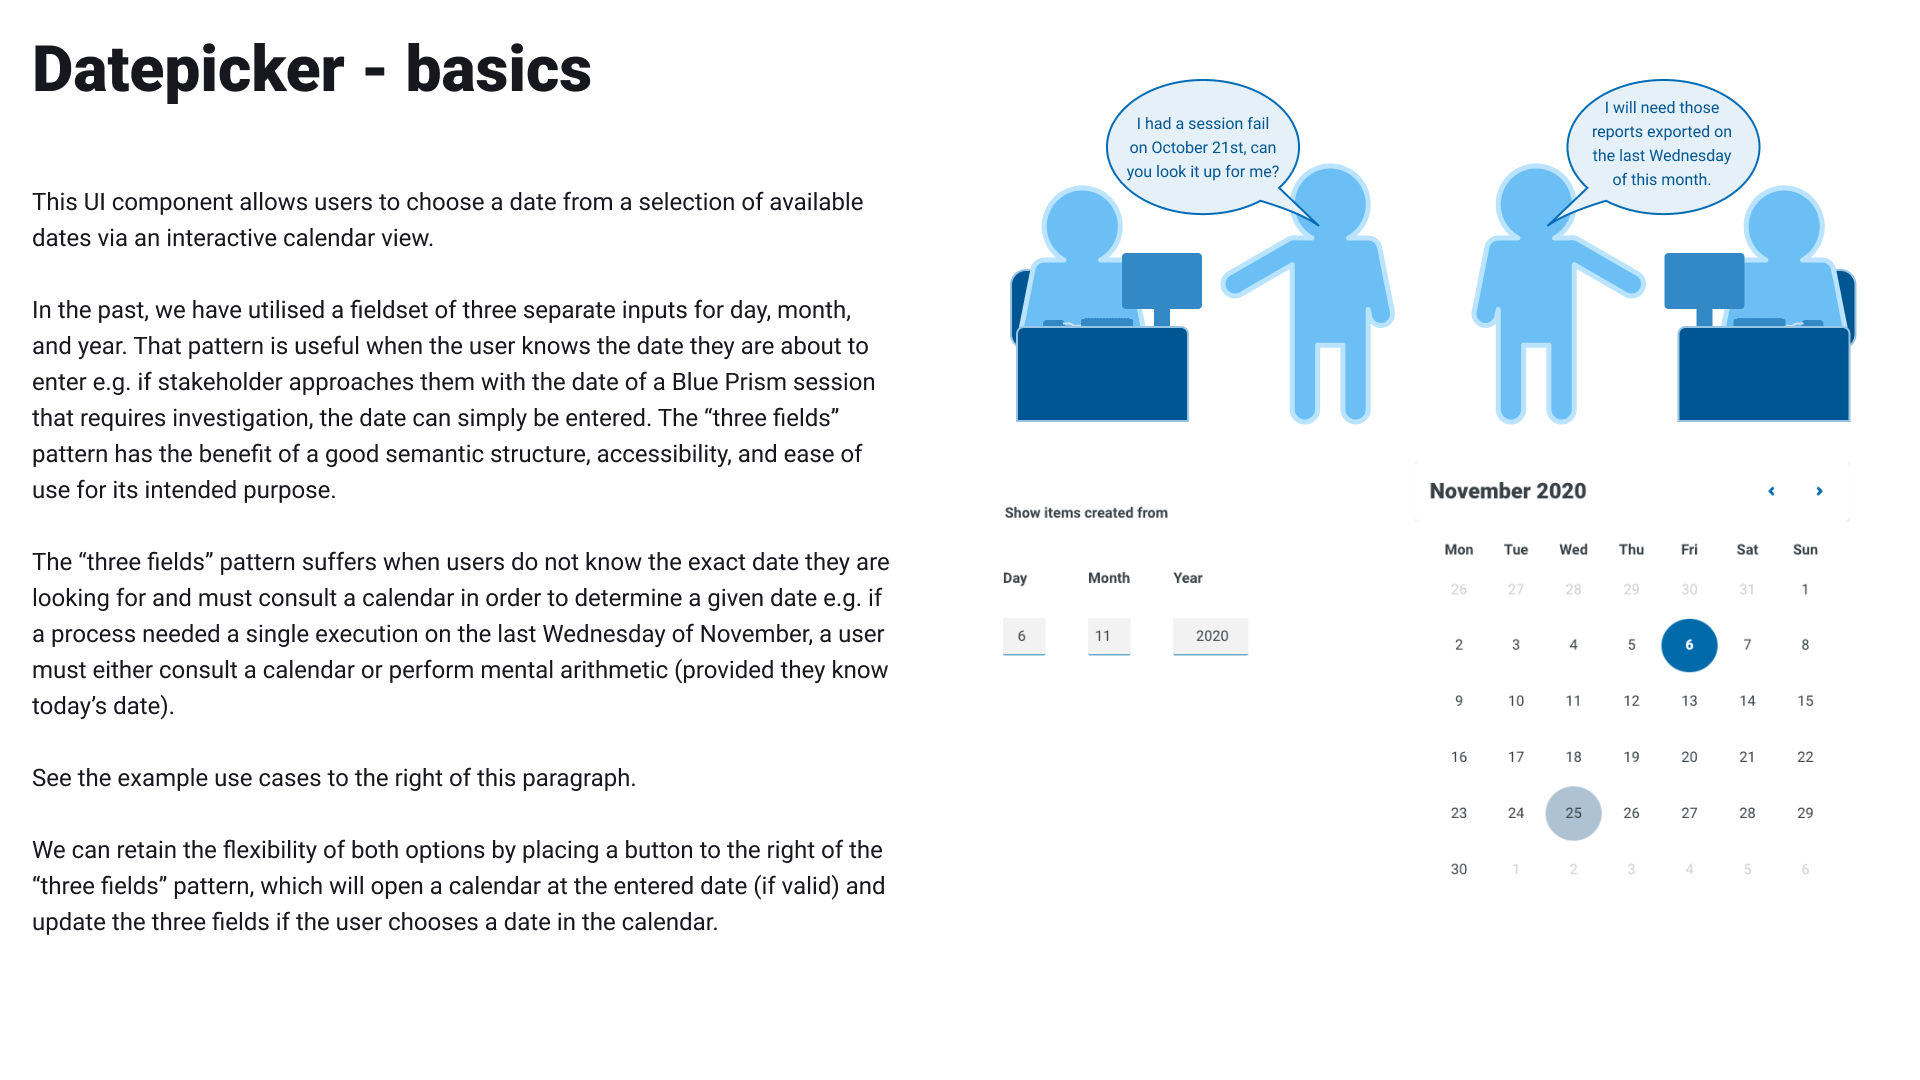 An explainer of datepicker use cases in the context of our software, based on research.